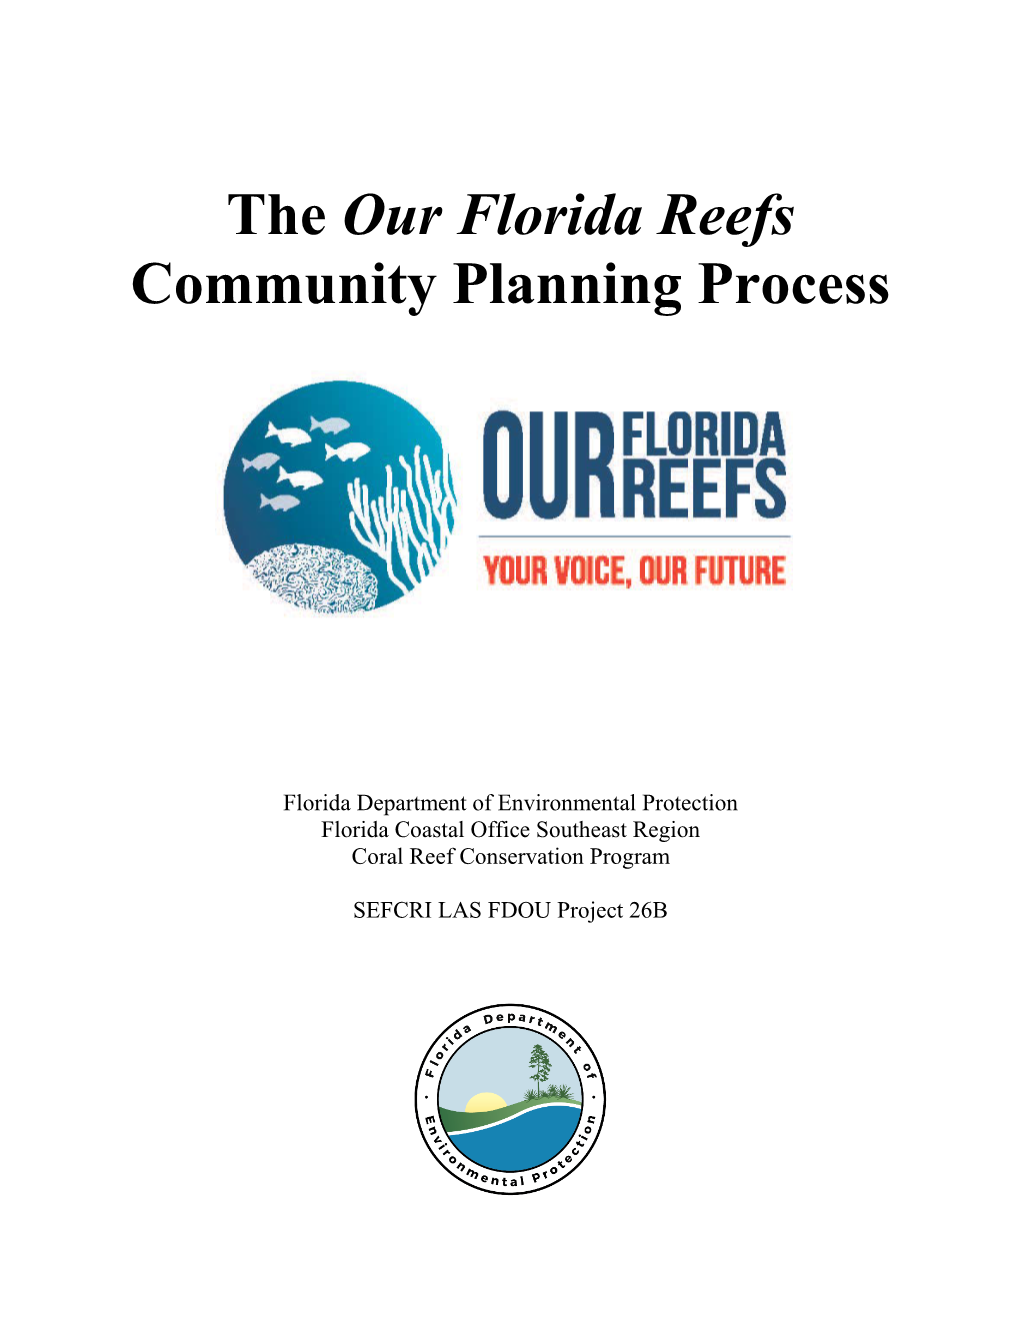 The Our Florida Reefs Community Planning Process Final Report